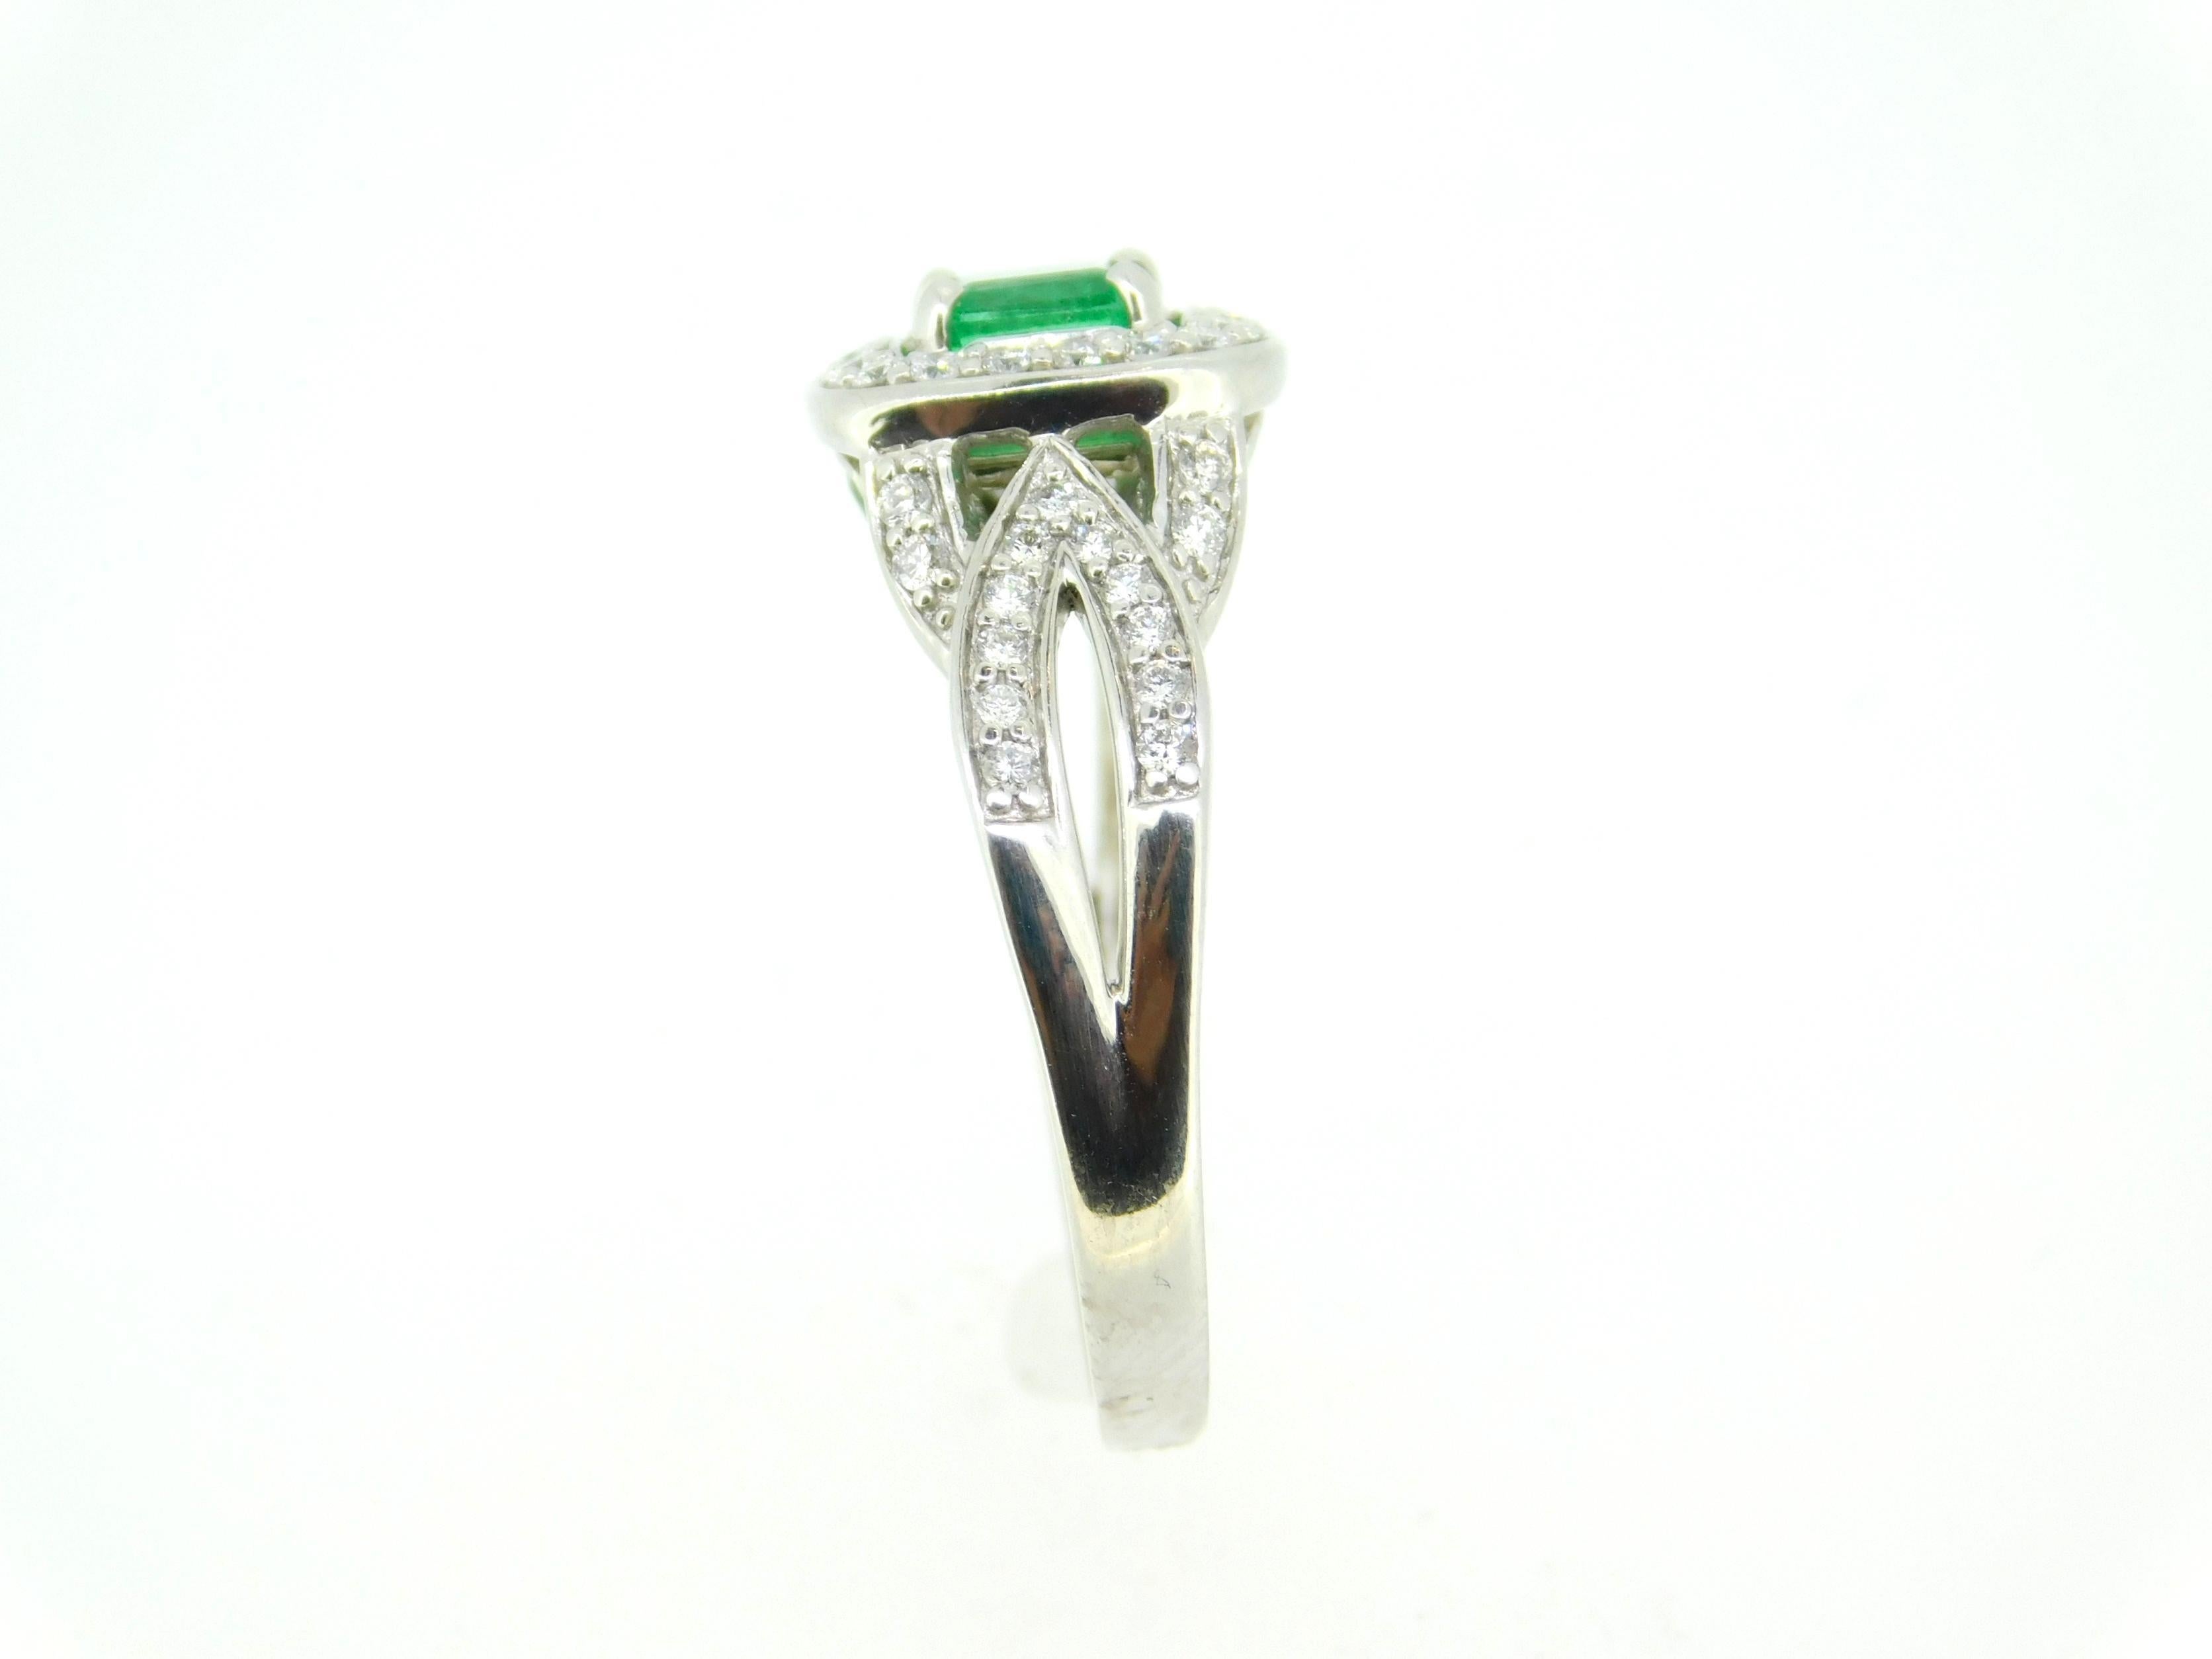 14k White Gold .56ct Genuine Natural Emerald and Diamond Halo Ring (#J5003)
14k white gold diamond and emerald ring featuring a square emerald weighing .56ct. It has bright grass green color and measures about 4.8mm. The emerald is accented by 1/2